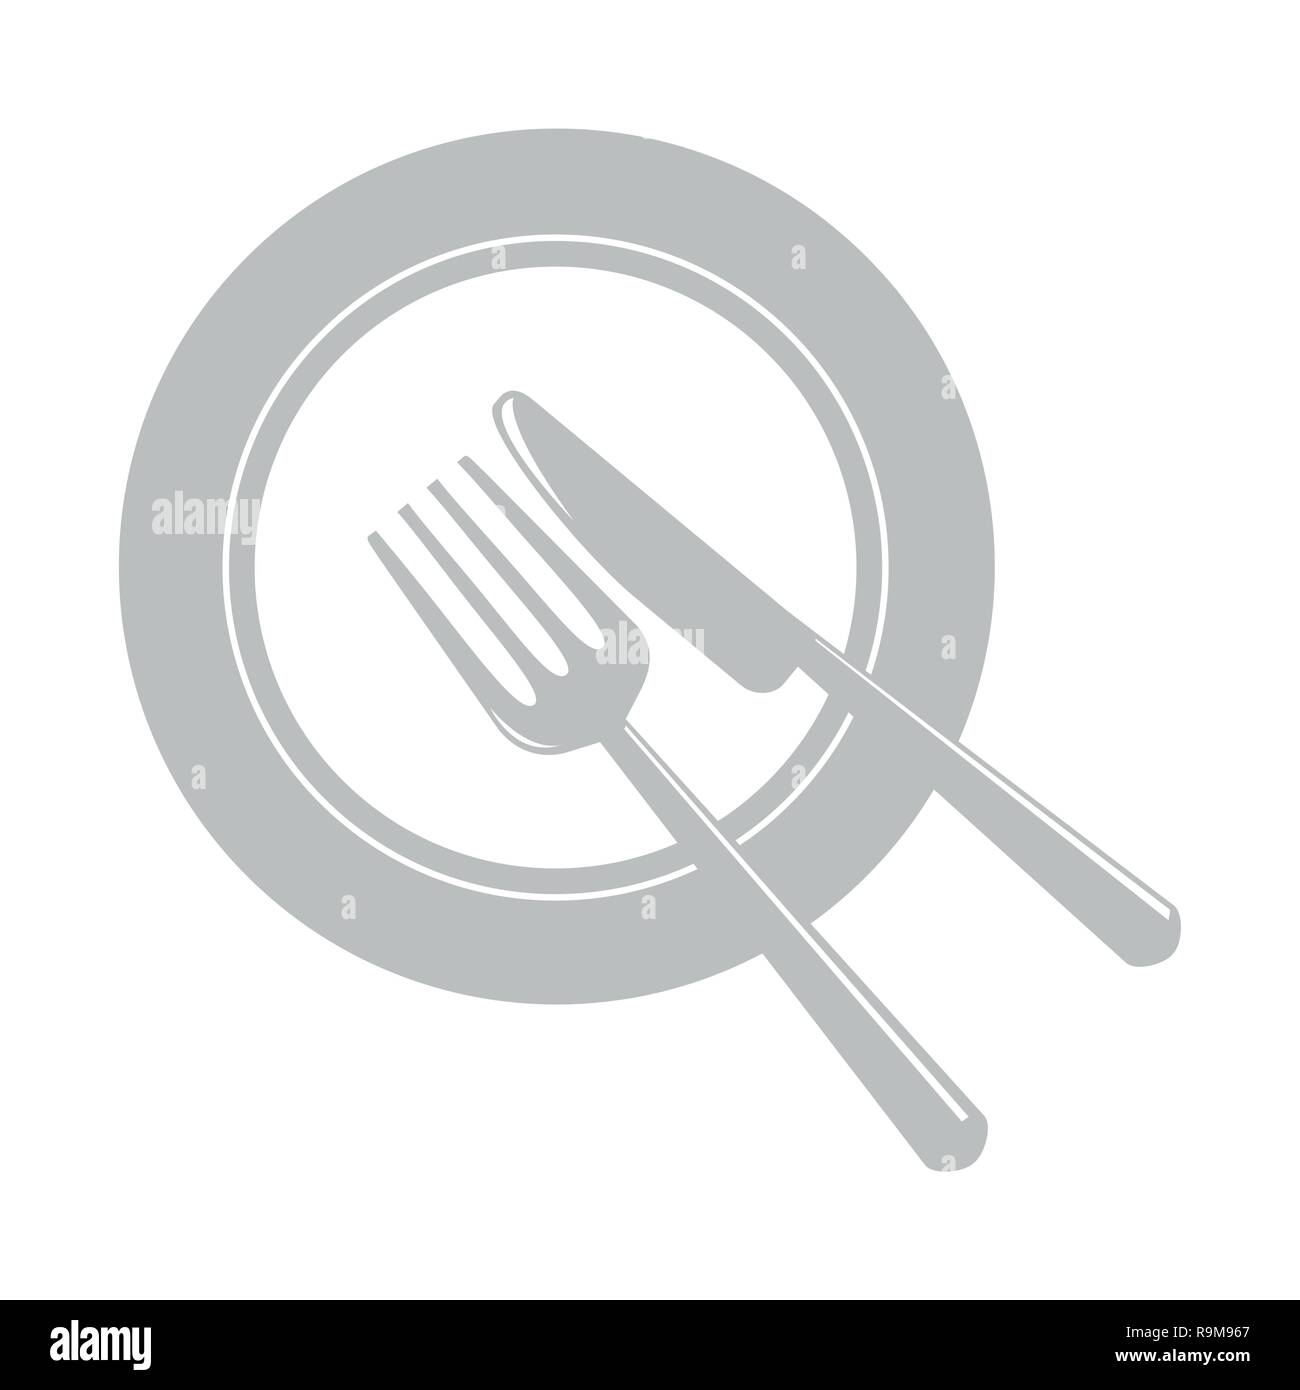 grey plate with cutlery icon vector illustration EPS10 Stock Vector